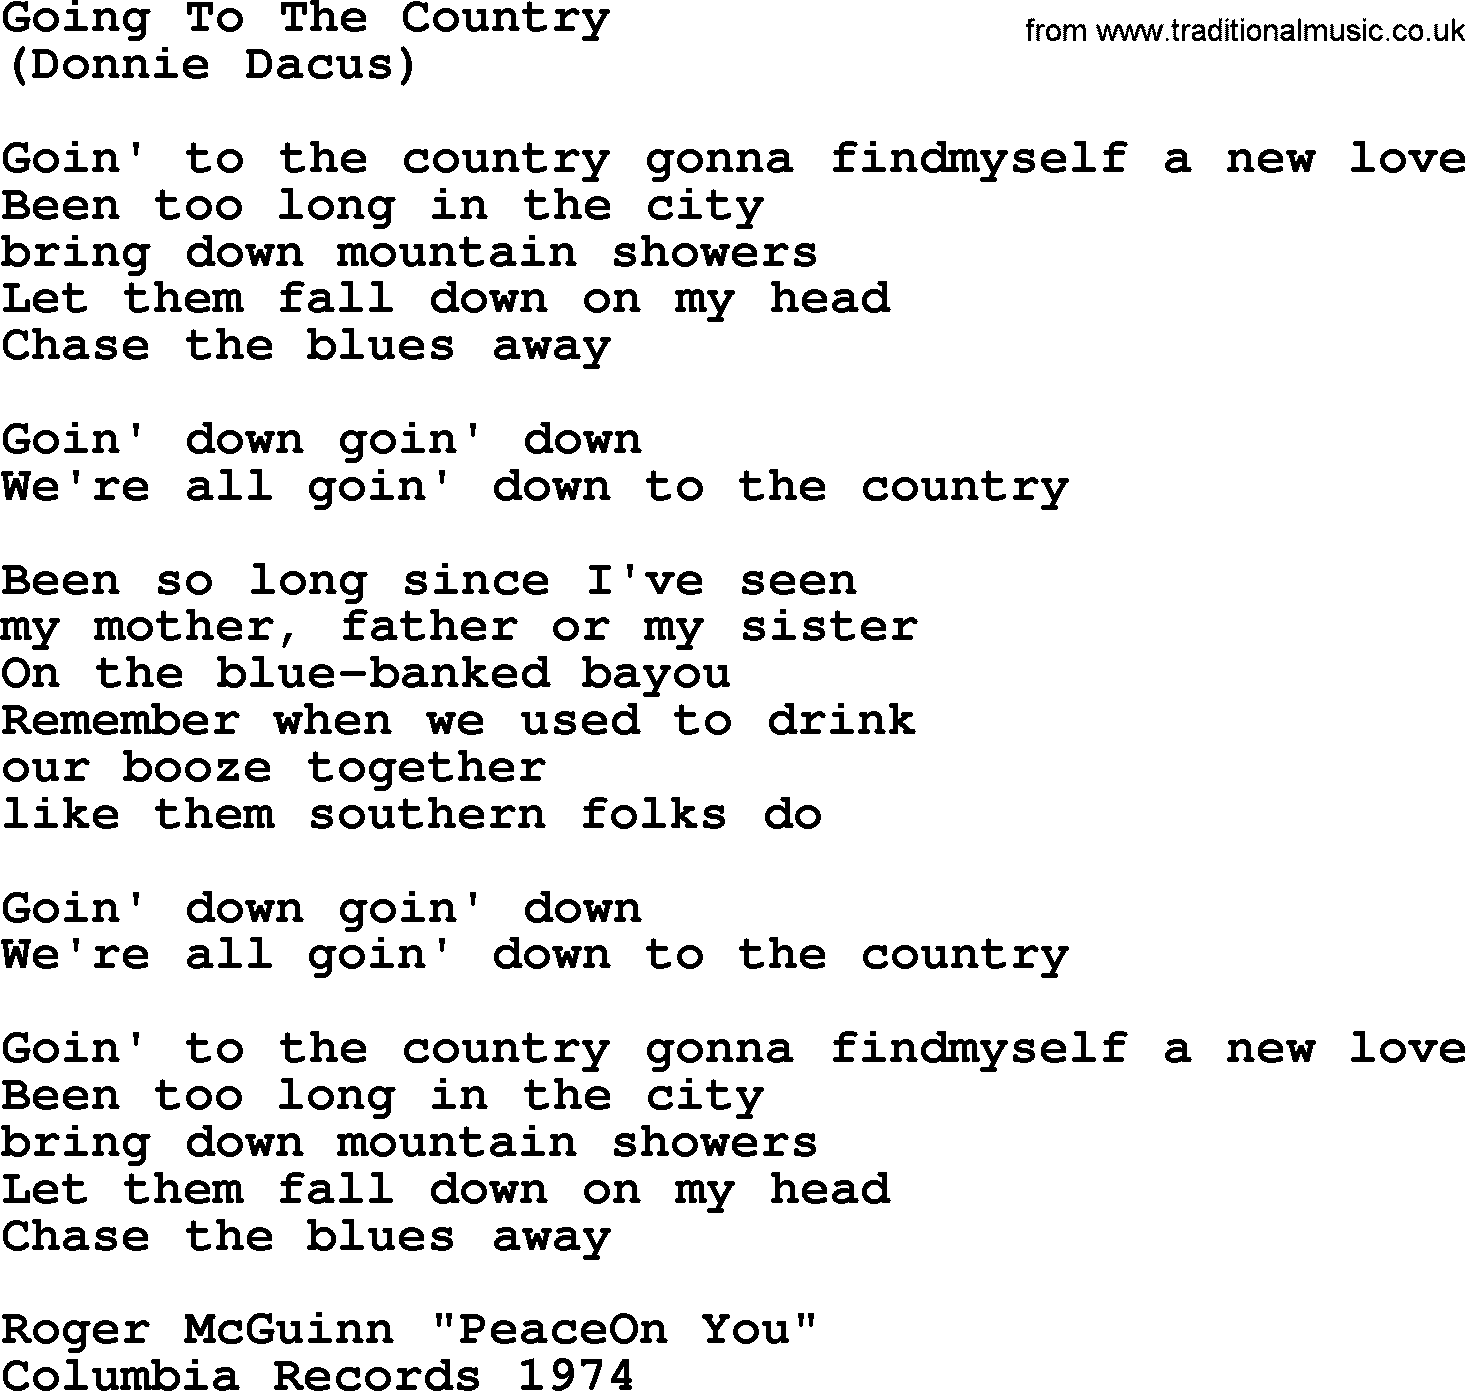 The Byrds song Going To The Country, lyrics